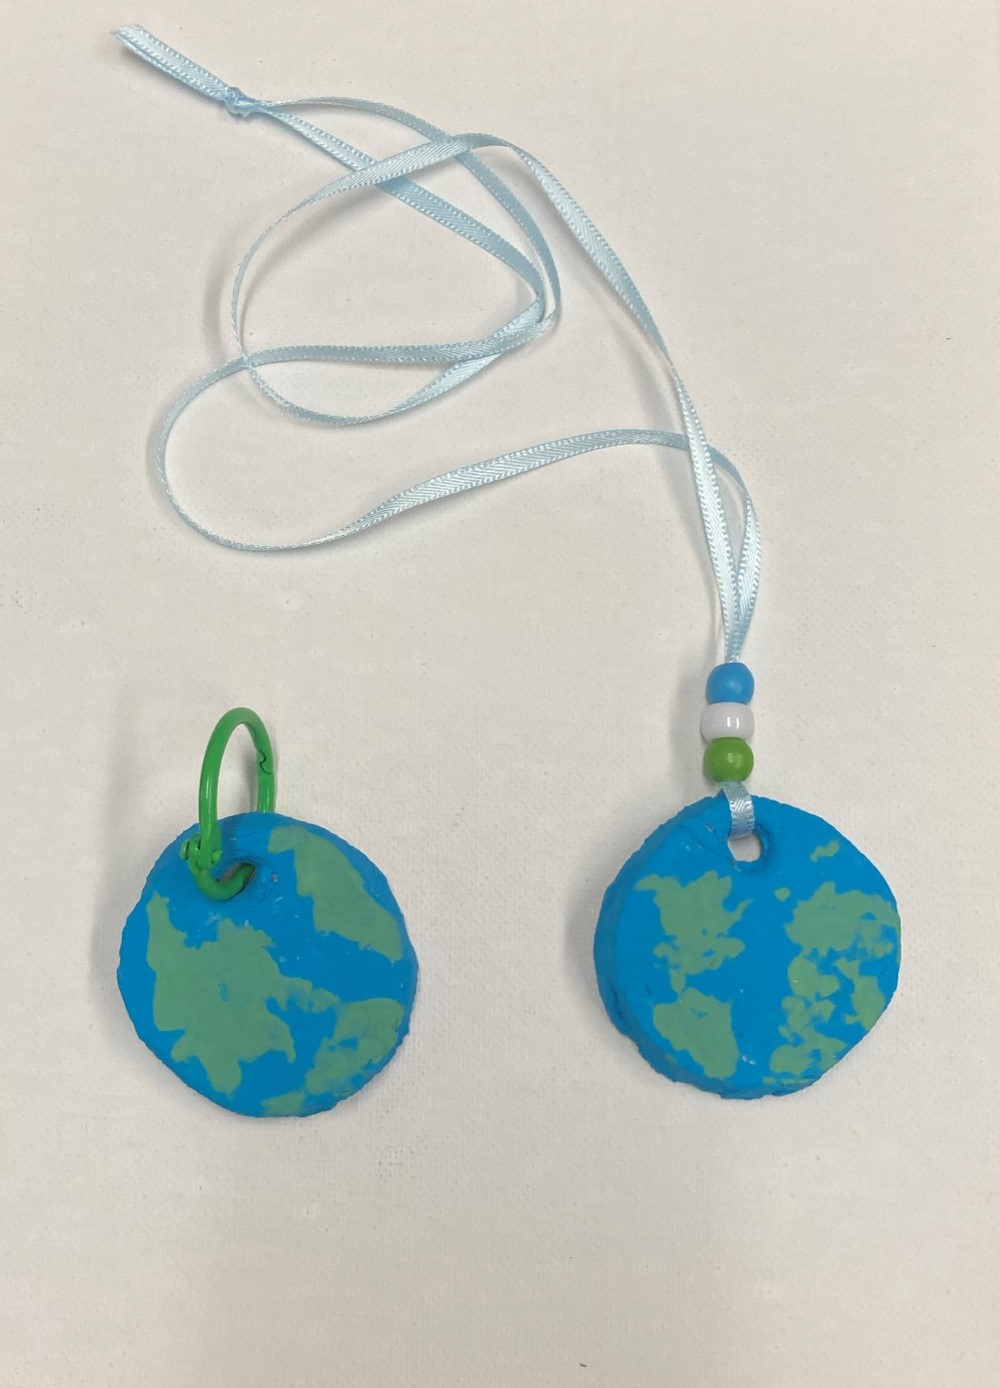 earth pendant necklace and key chain